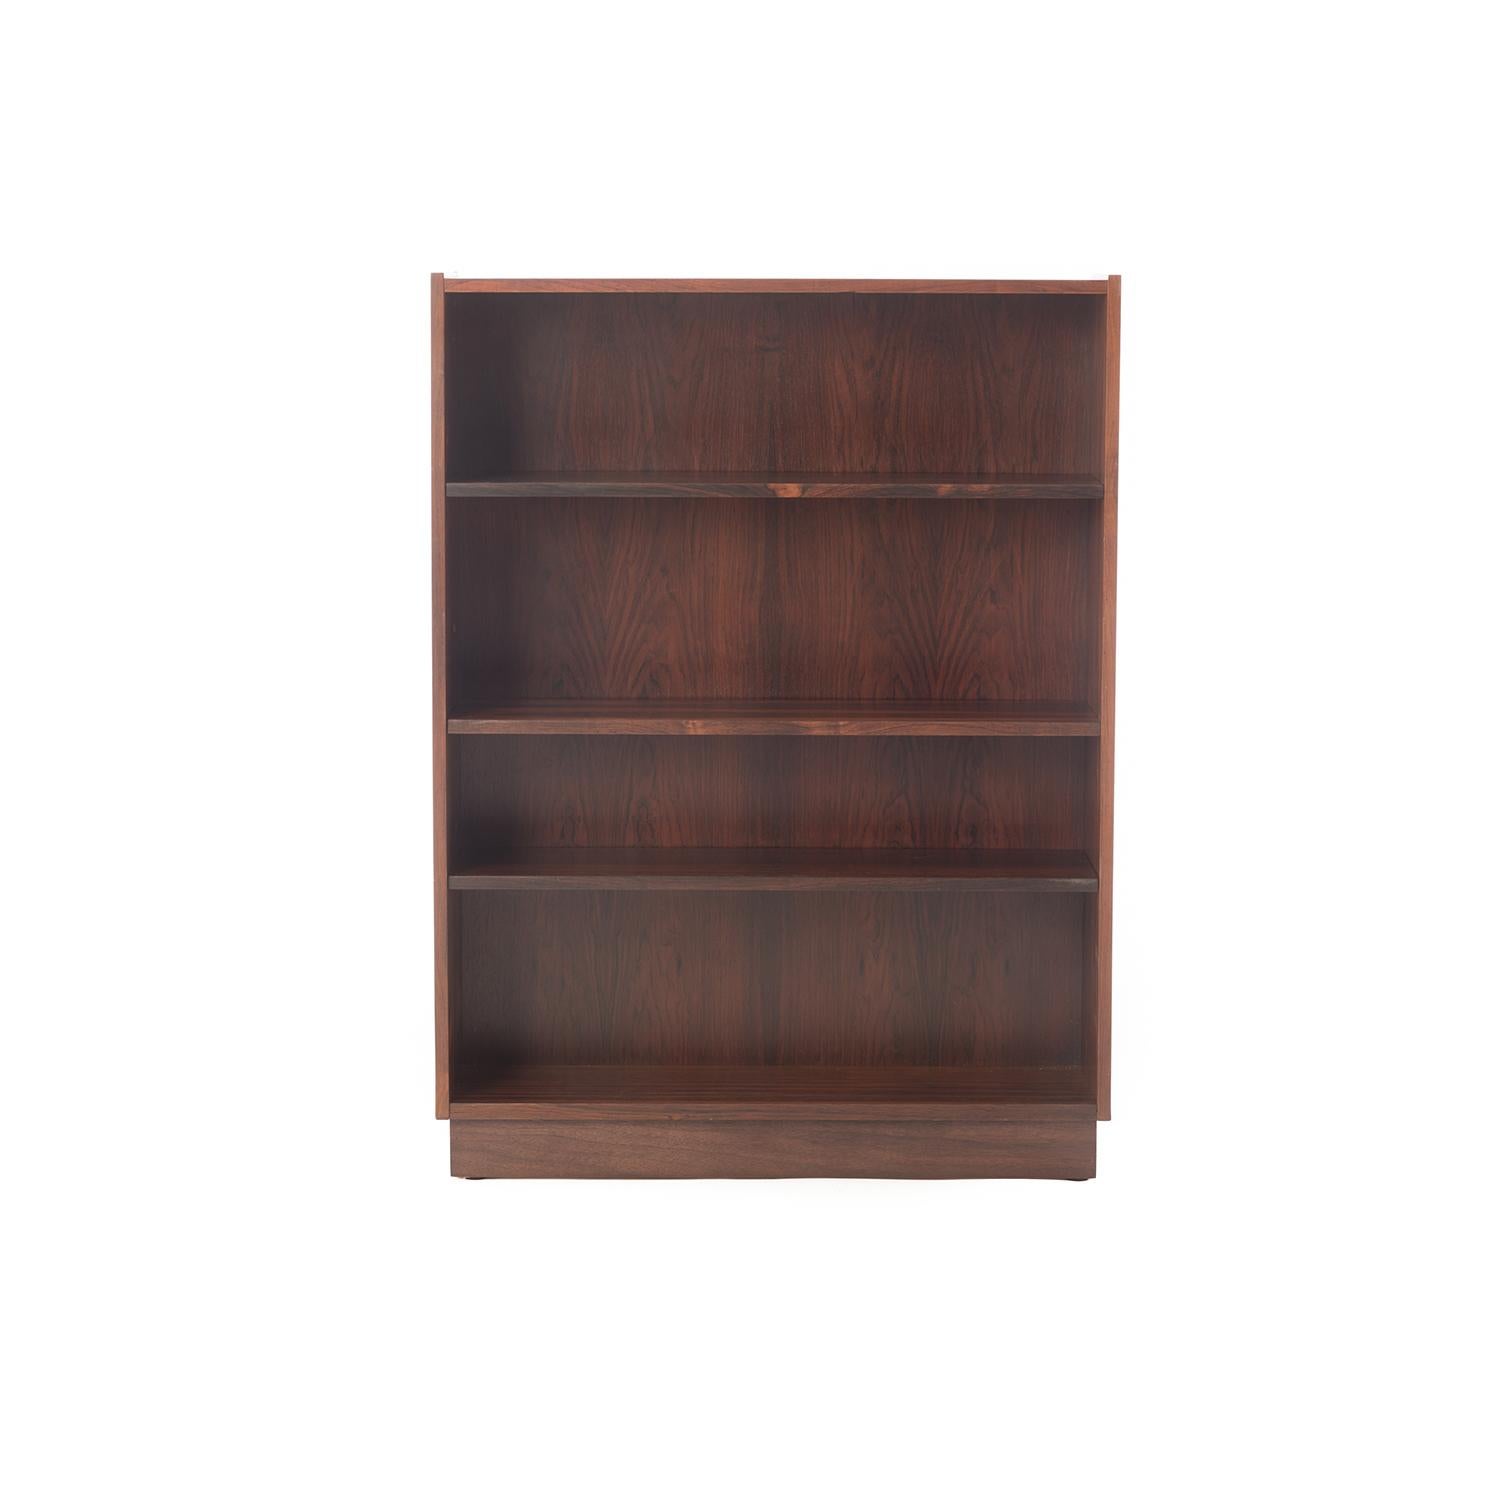 This is a lovely bookcase in a manageable (movable) size, with shelves that adjust to many settings using a hidden wire system. Plinth style base sits on the floor. Old growth rosewood with a lacquer finish. 

Professional, skilled furniture